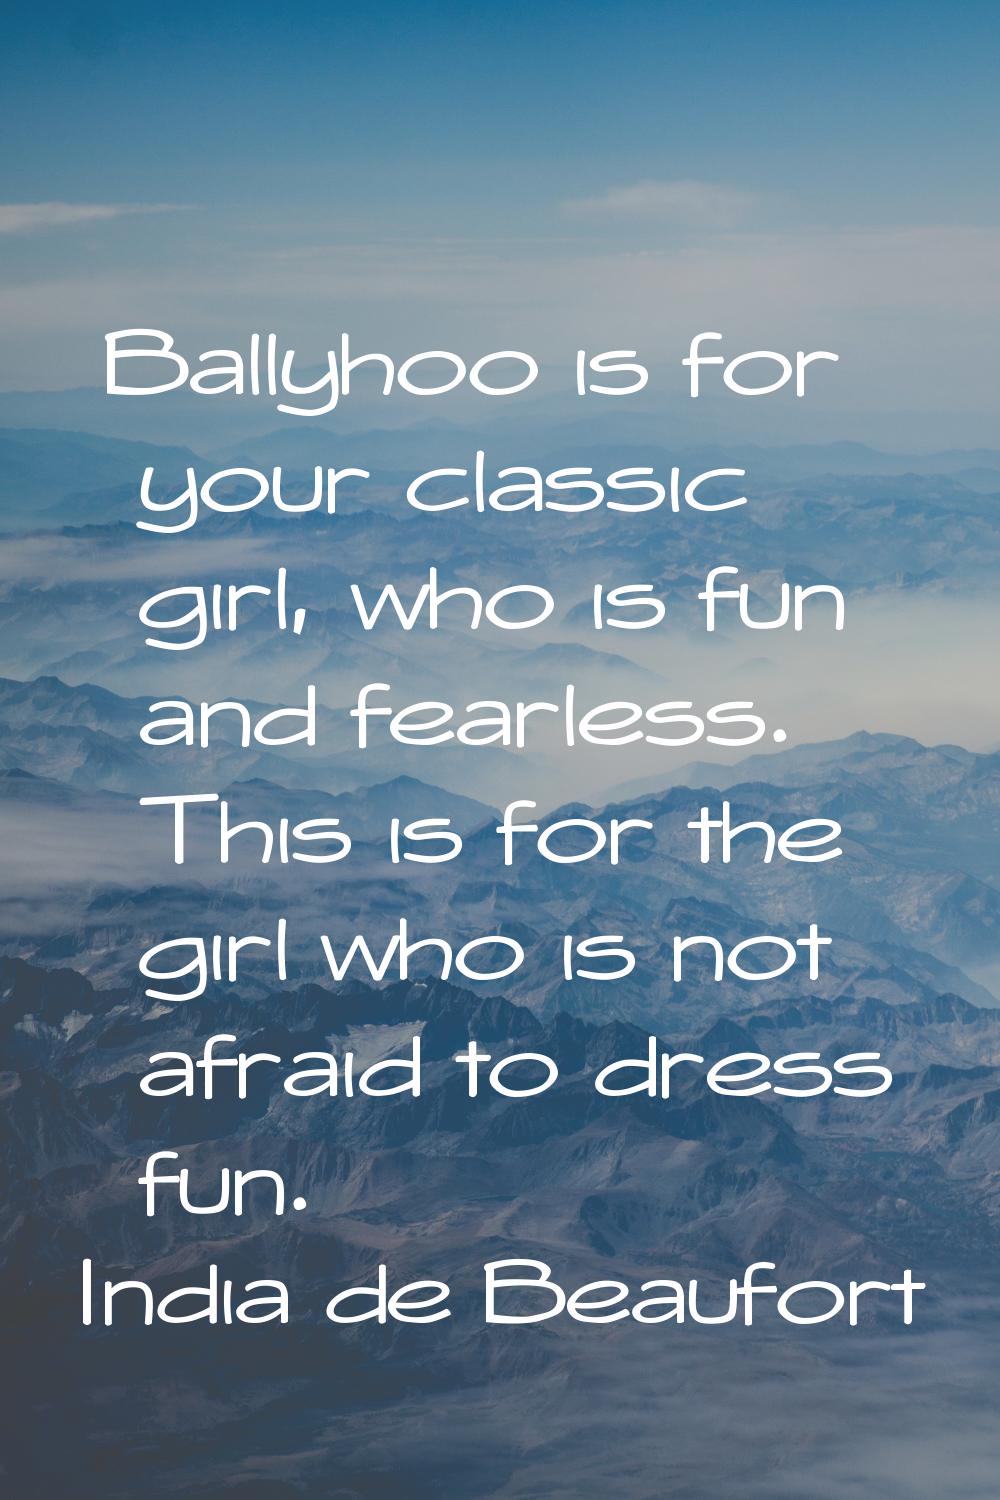 Ballyhoo is for your classic girl, who is fun and fearless. This is for the girl who is not afraid 